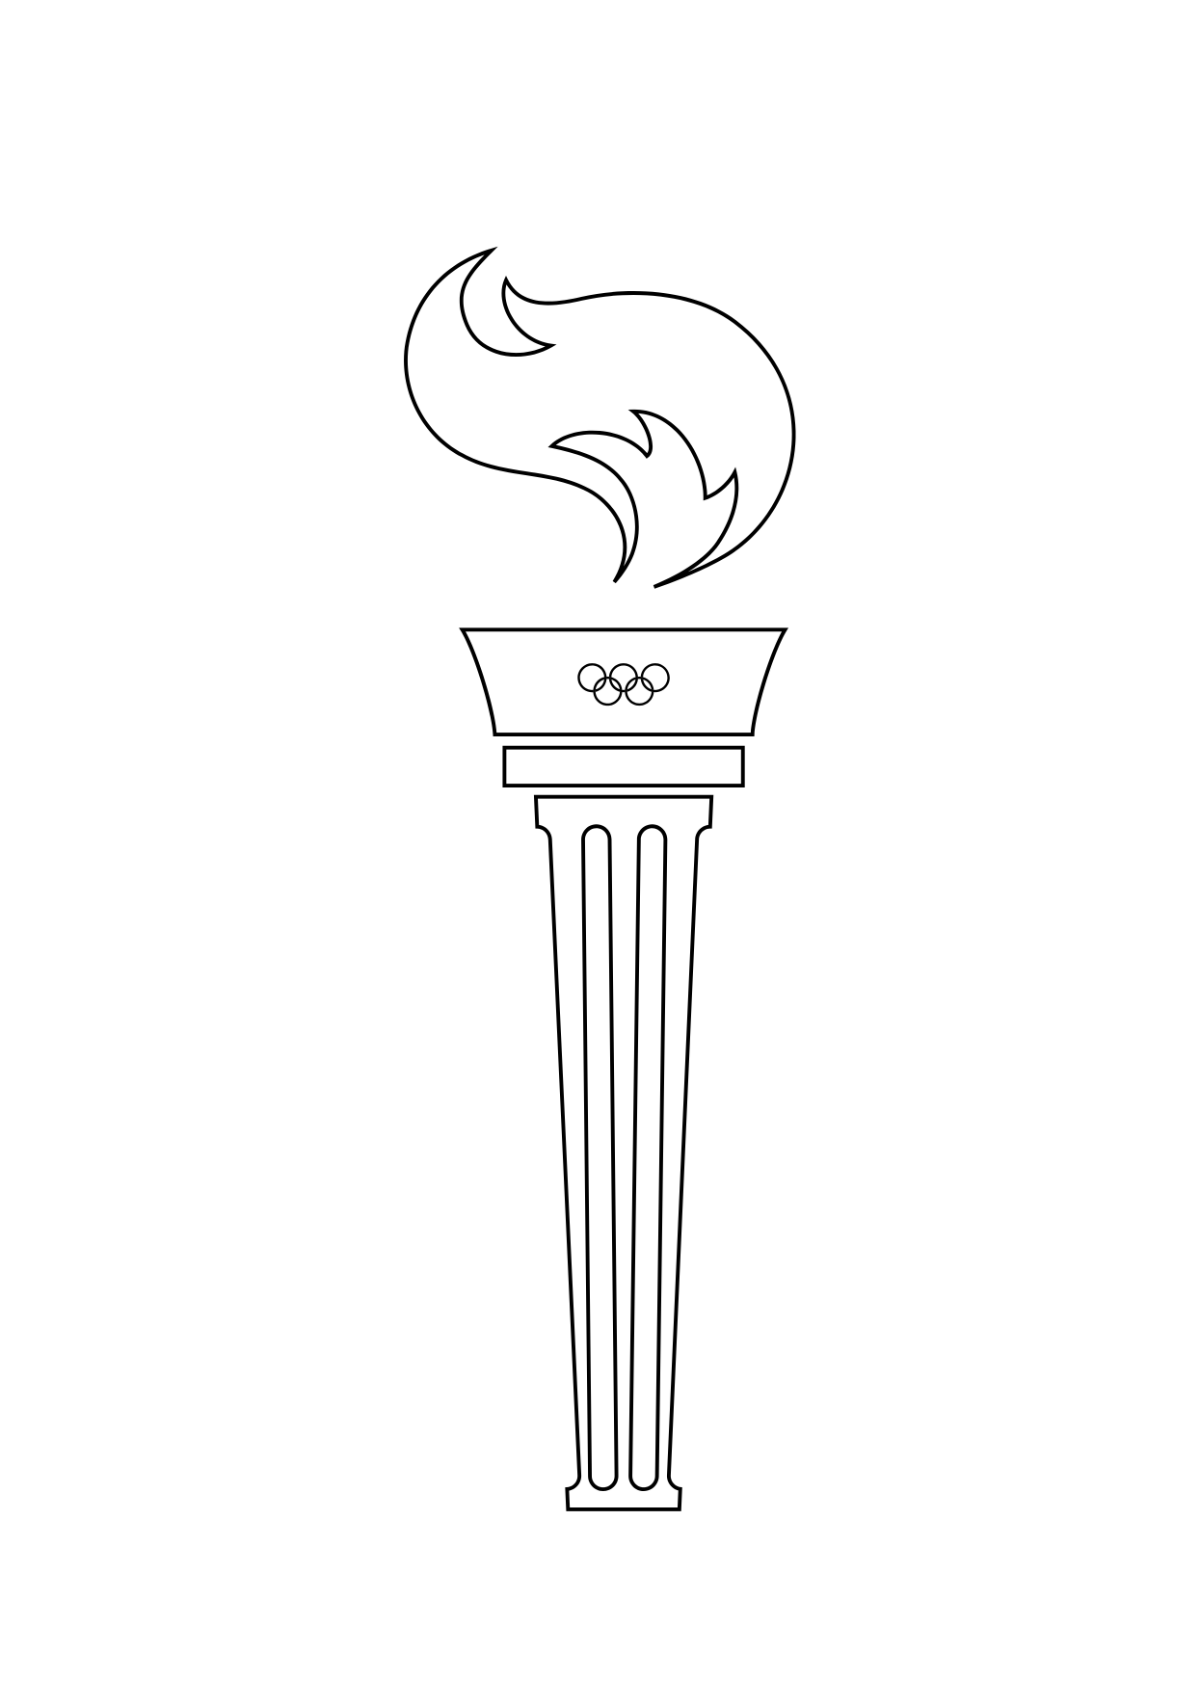 Olympics Torch Drawing